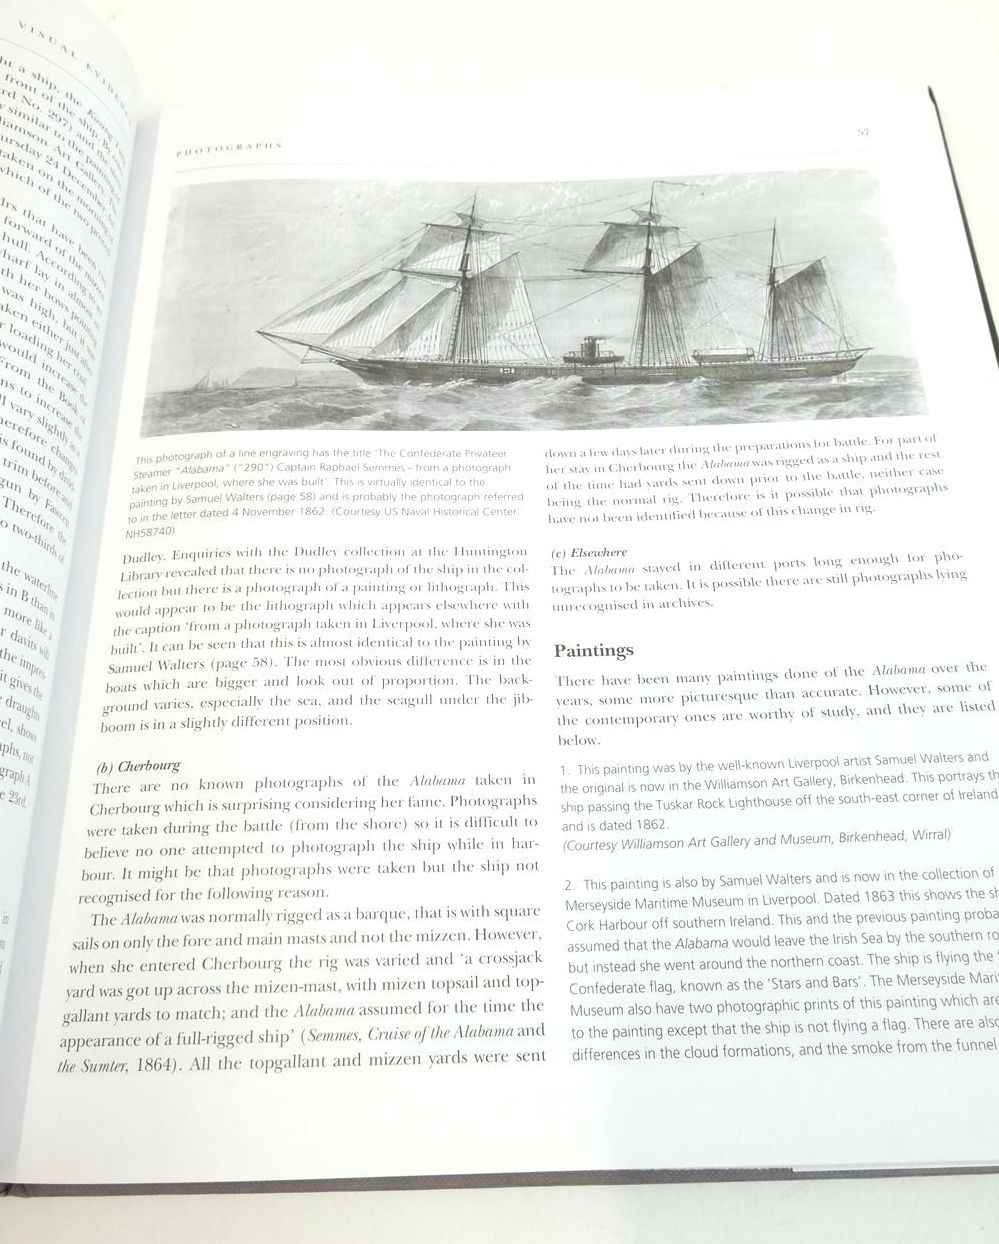 Photo of CSS ALABAMA: ANATOMY OF A CONFEDERATE RAIDER written by Bowcock, Andrew published by Chatham Publishing (STOCK CODE: 1823333)  for sale by Stella & Rose's Books